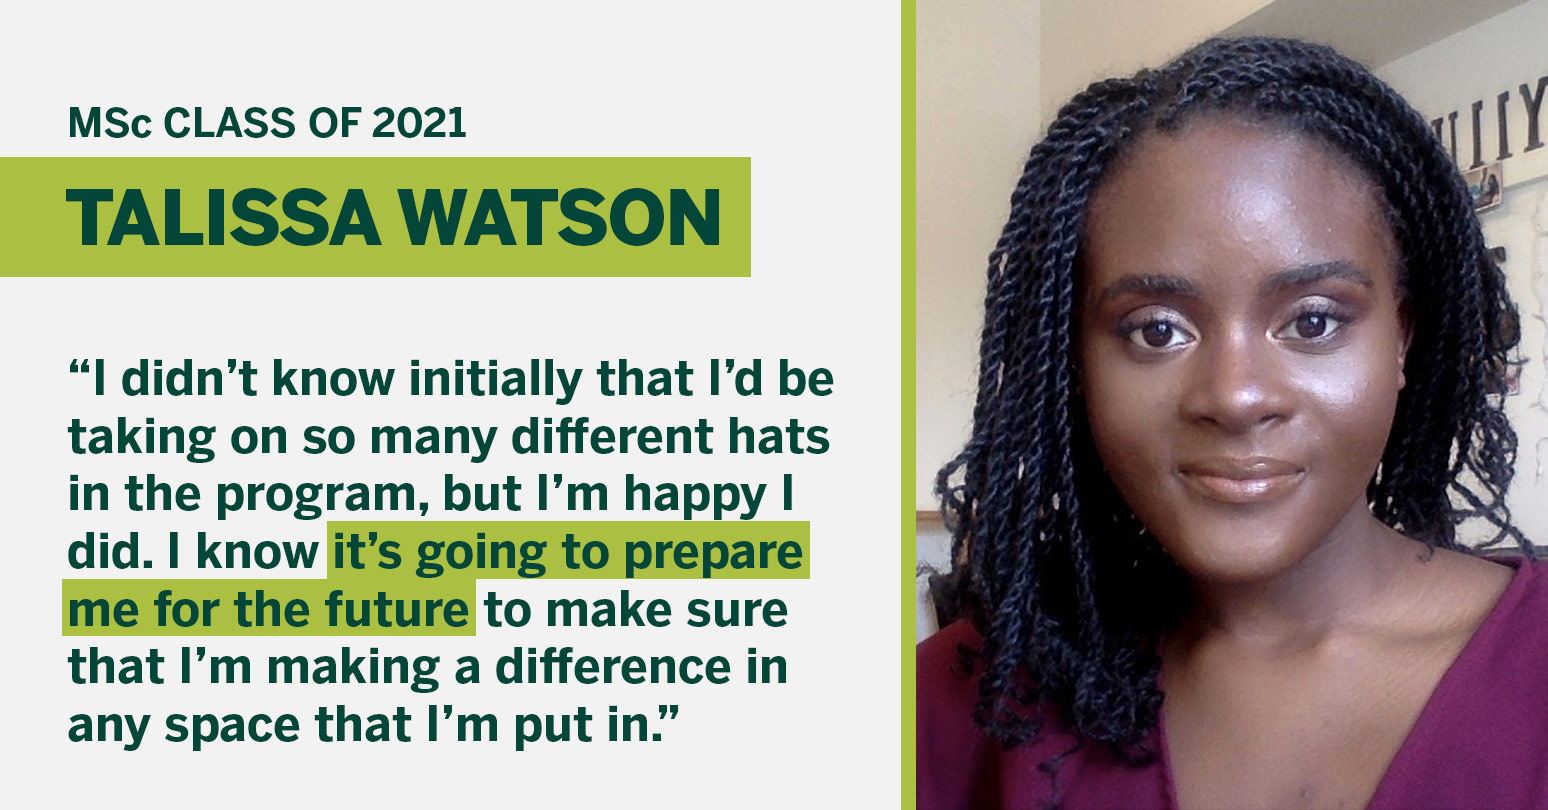 MSc Class of 2021 Talissa Watson "I didn't know initially that I'd be taking on so many different hats in the program, but I'm happy I did. I know it's going to prepare me for the future to make sure that I'm making a difference in any space that I'm in."